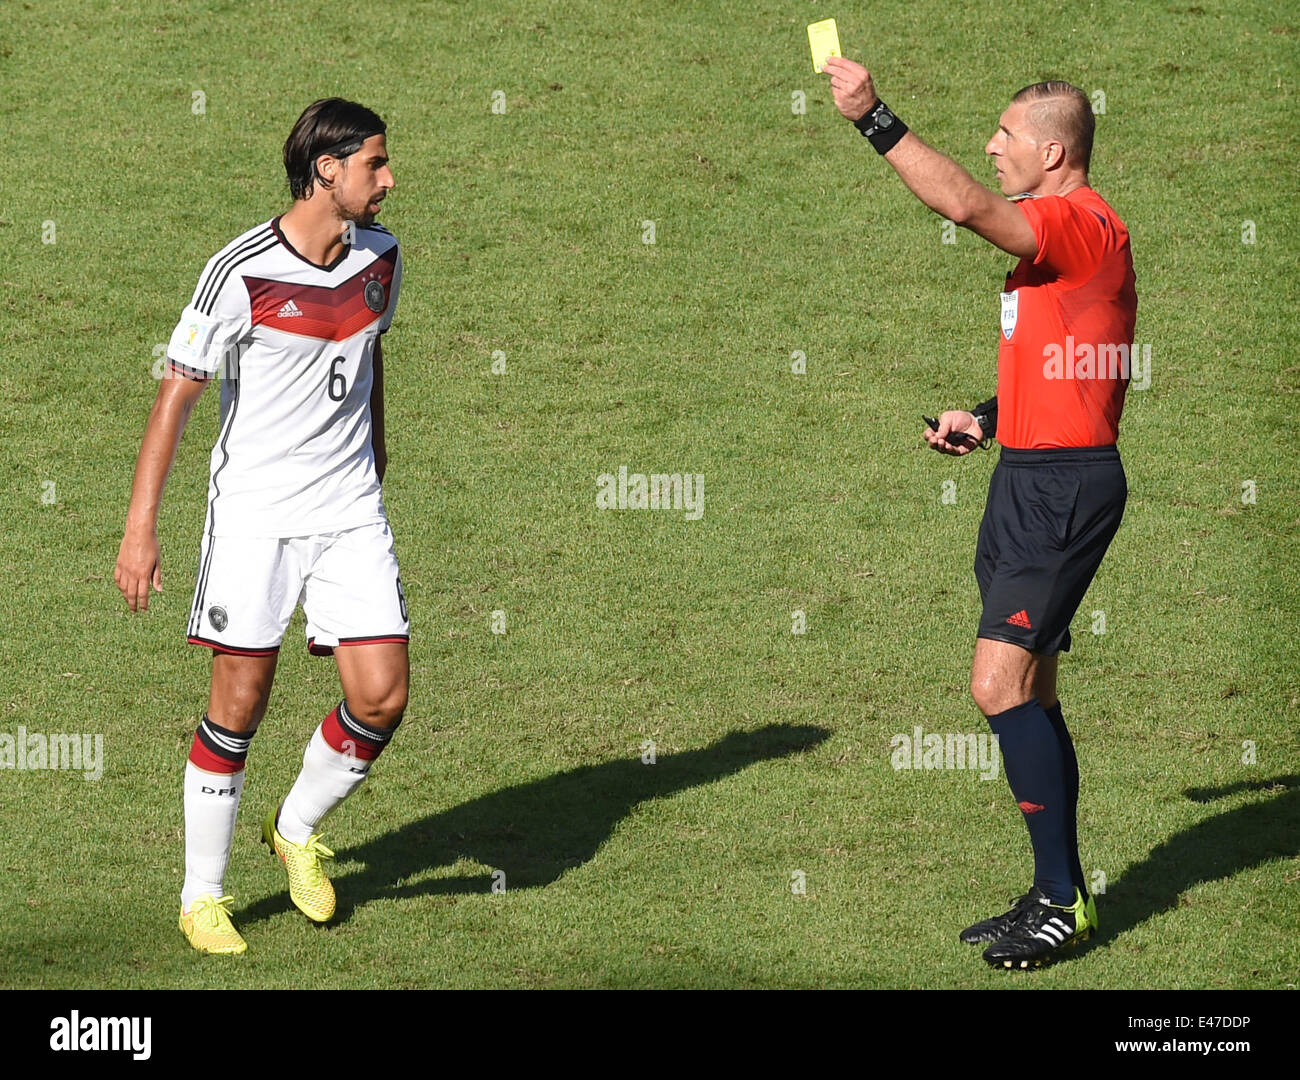 Rio de Janeiro, Brazil. 04th July, 2014. Sami Khedira (L) of Germany is shown a yellow card by referee Nestor Pitana during the FIFA World Cup 2014 quarter final soccer match between France and Germany at Estadio do Maracana in Rio de Janeiro, Brazil, 04 July 2014. Photo: Marcus Brandt/dpa/Alamy Live News Stock Photo